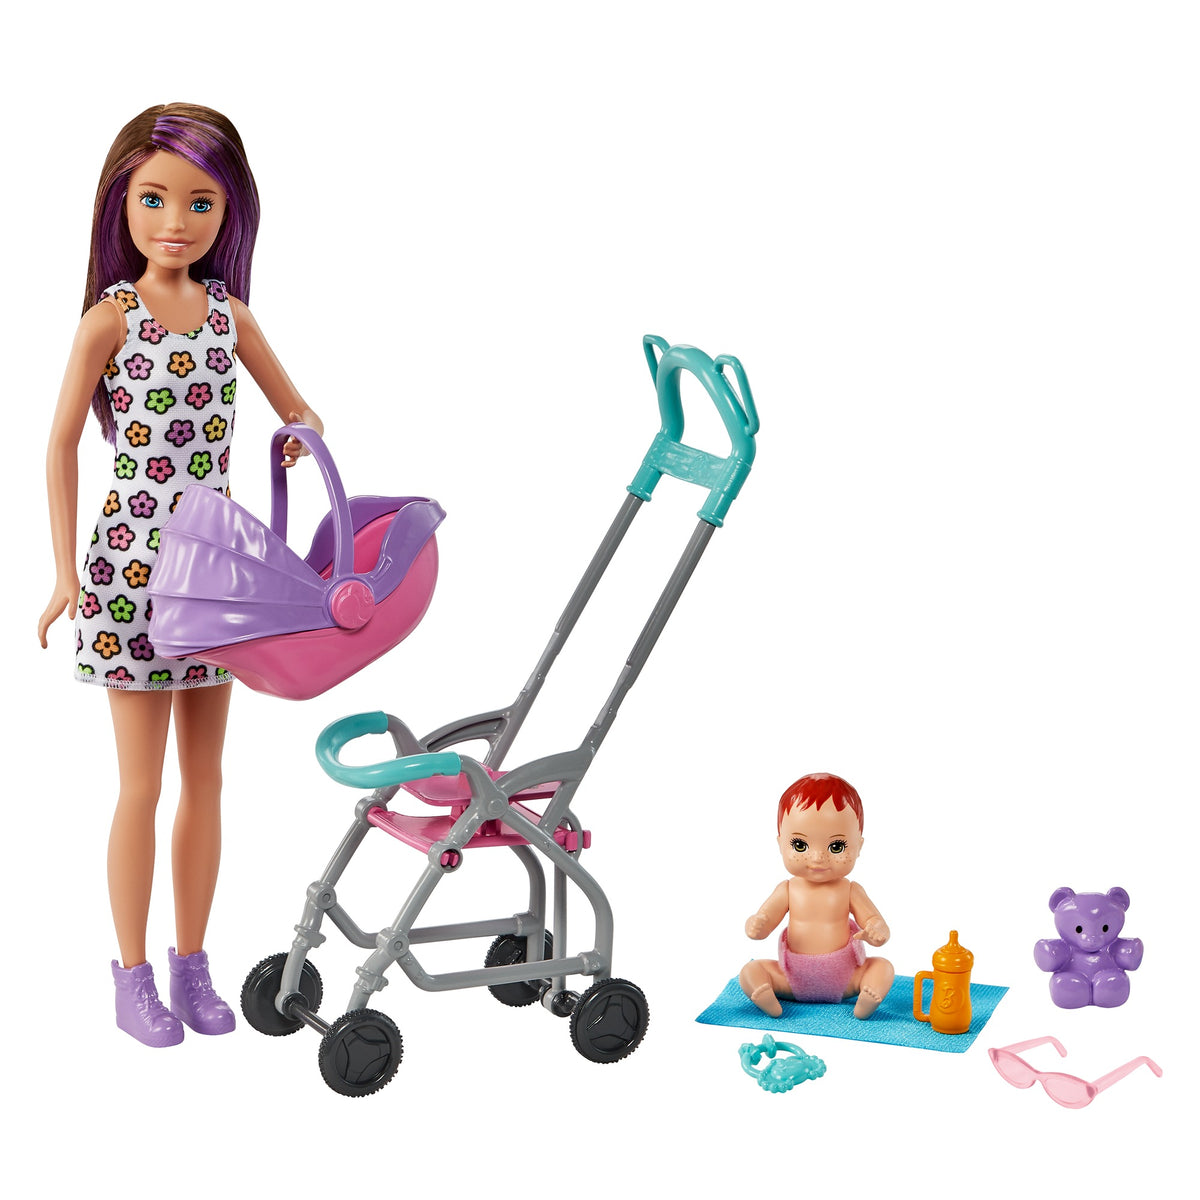 Barbie Skipper Babysitters Playset with Skipper Babysitter Brunette Doll, Stroller, Baby Doll & 5 Accessories for Kids Ages 3 Year & Up